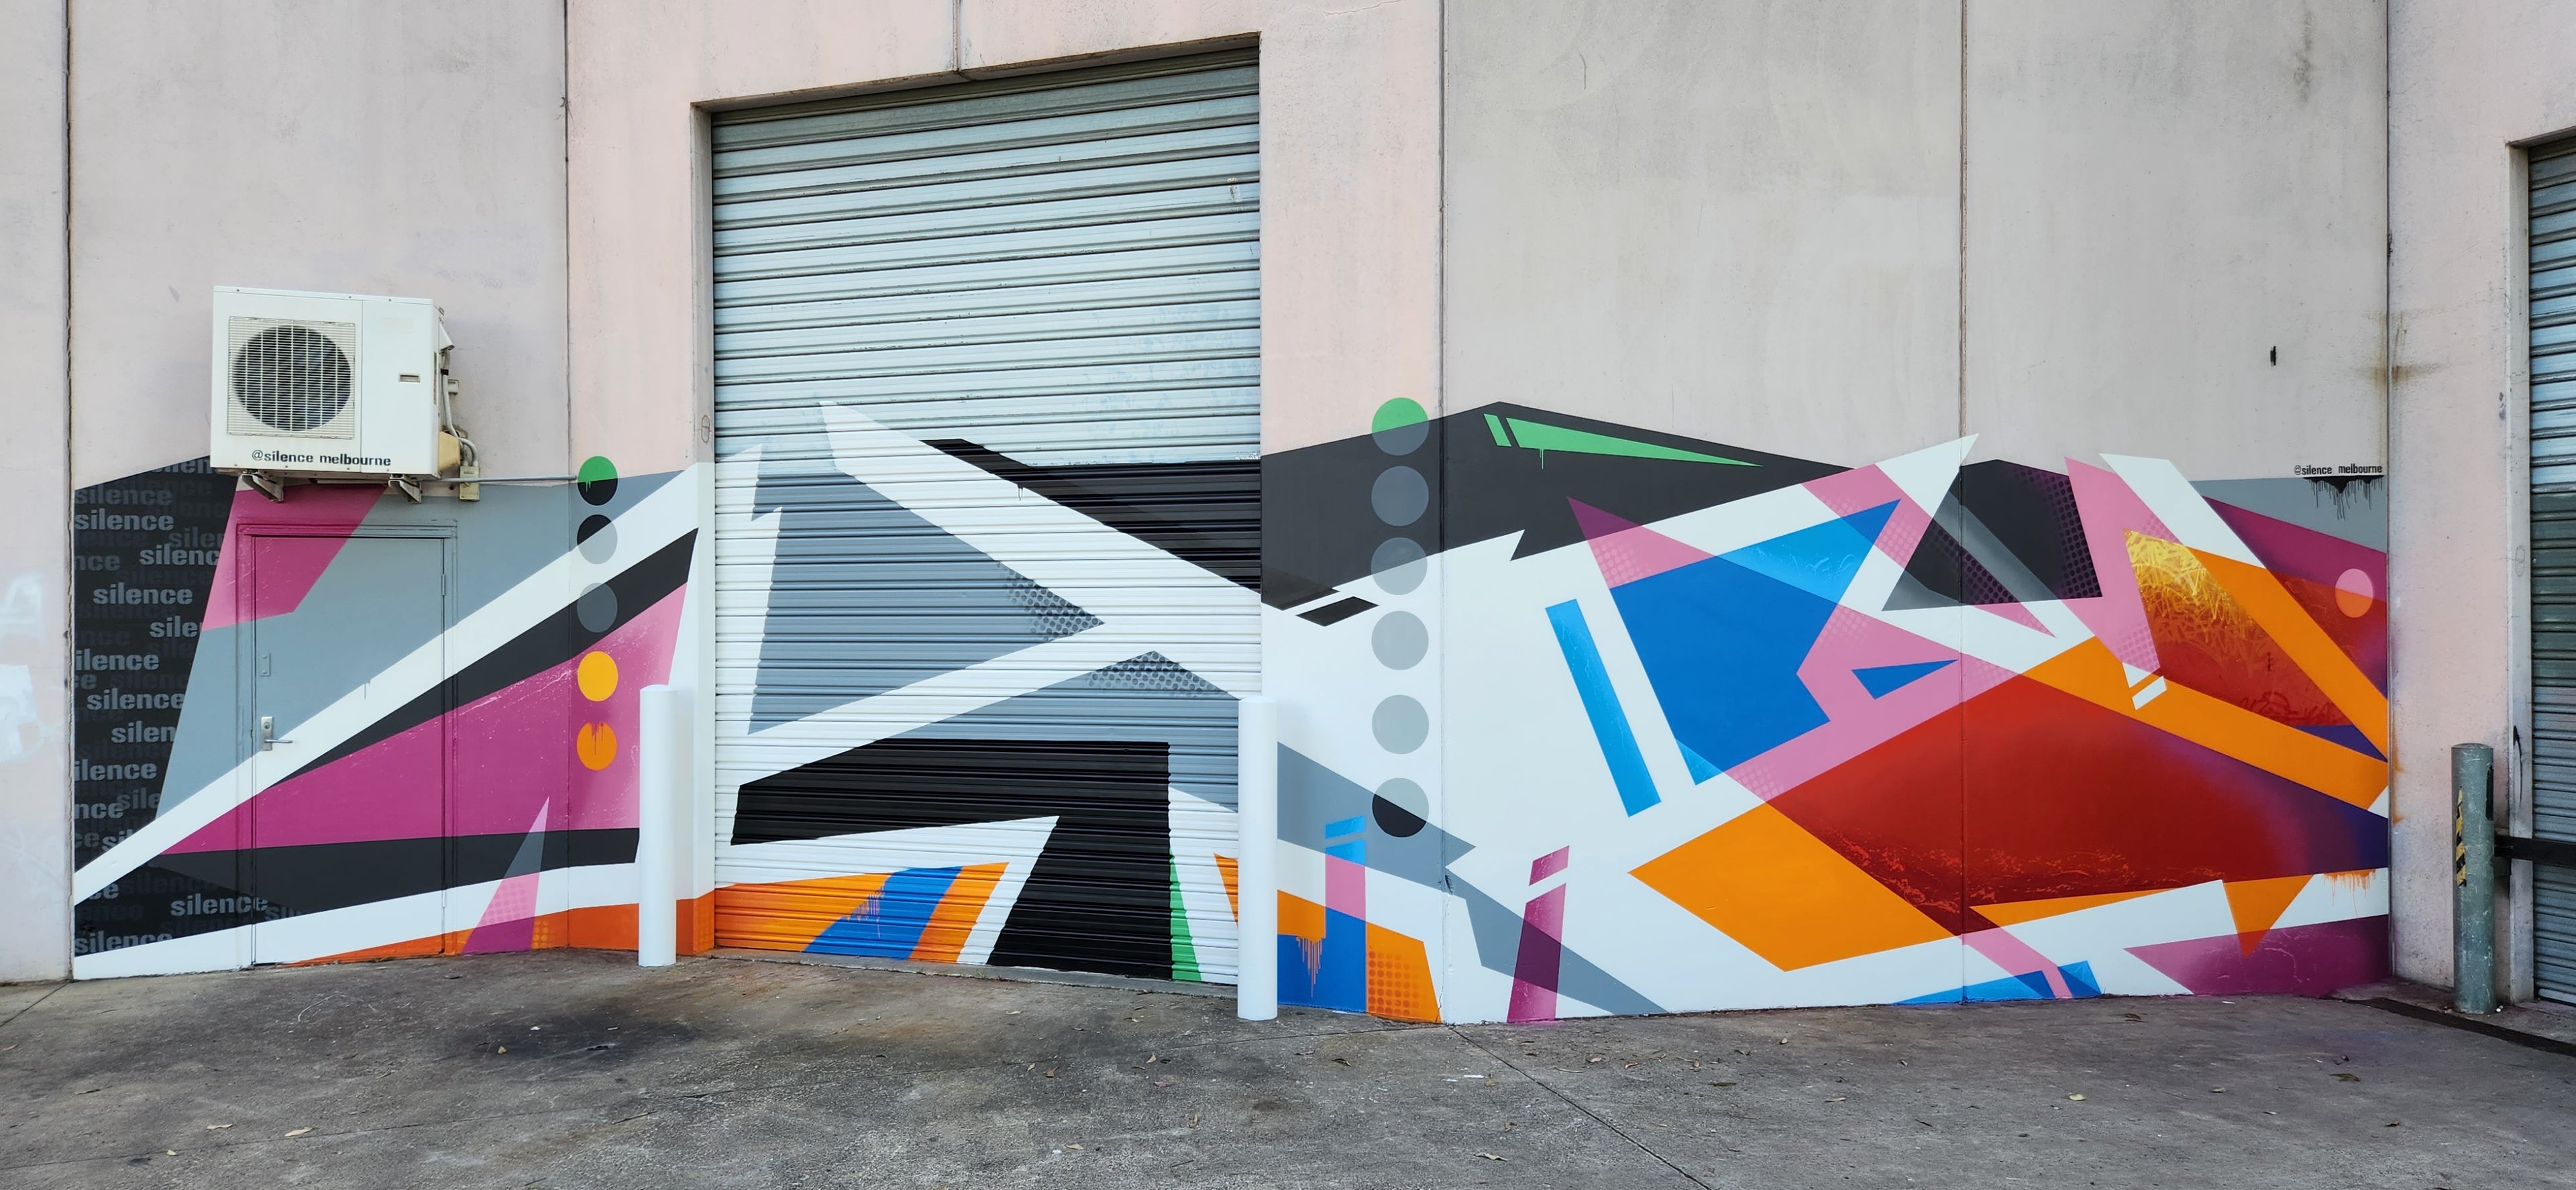 Colourful Silence abstract mural - factory space 